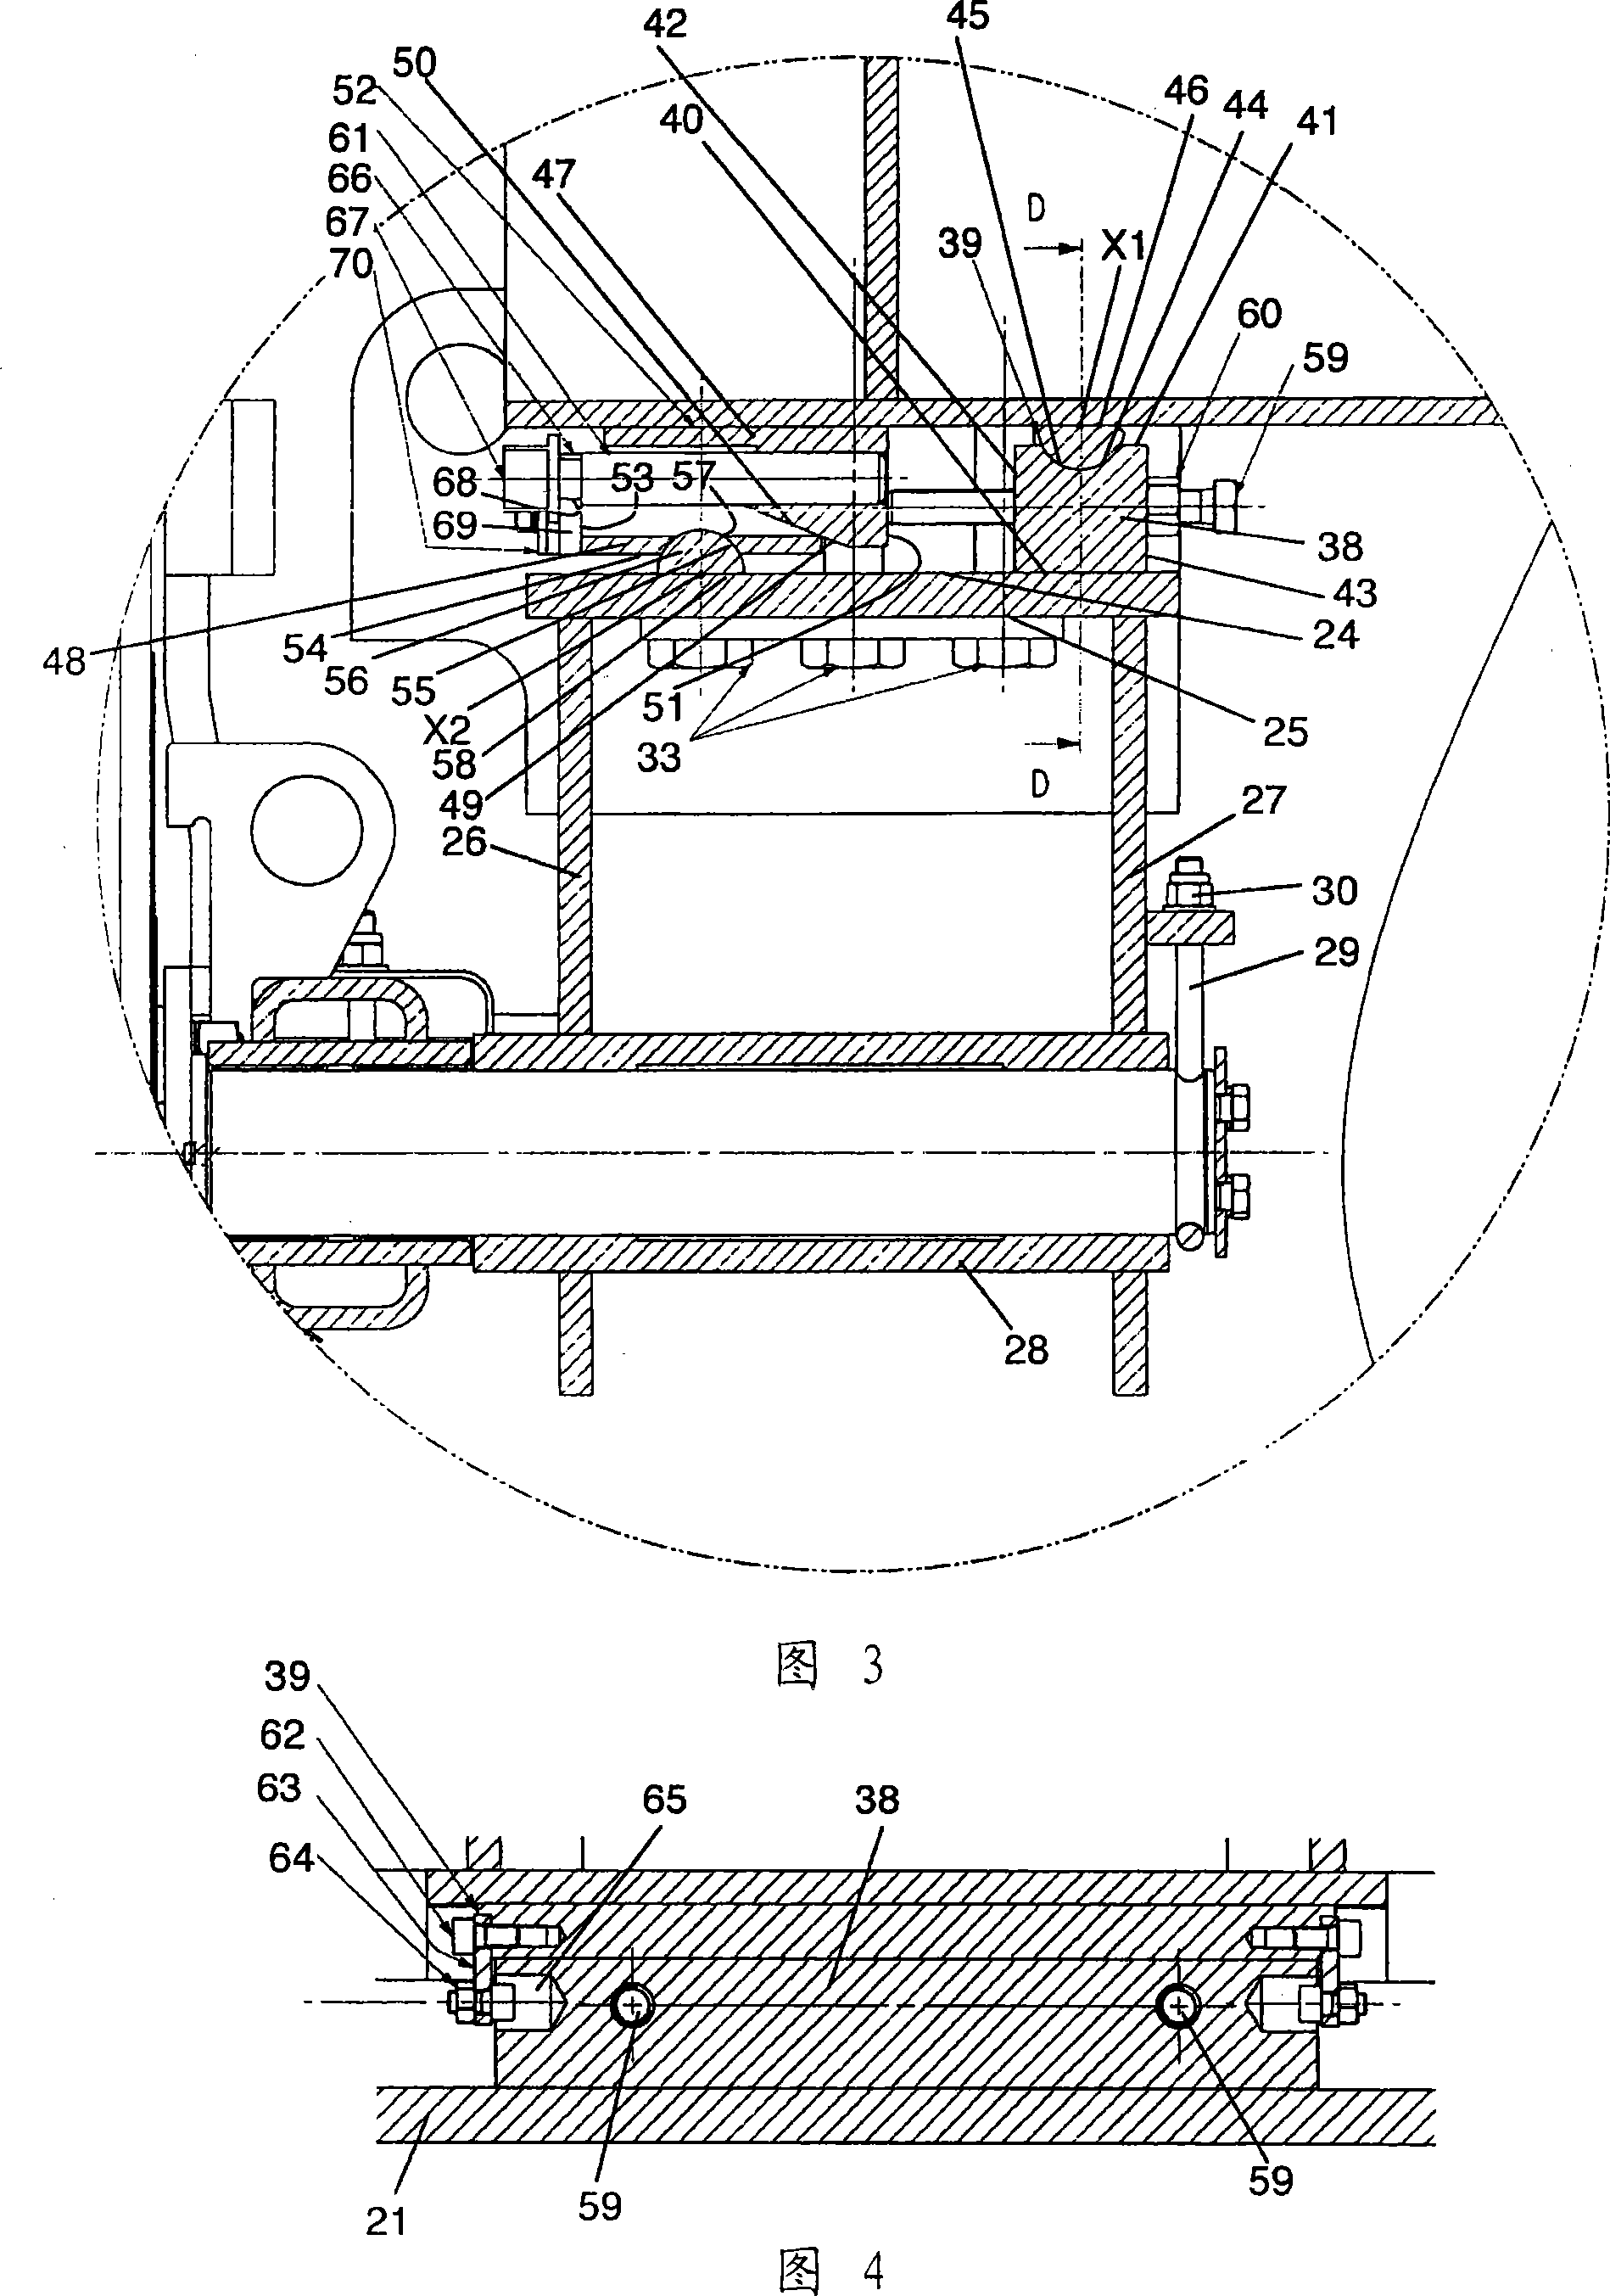 Mechanical device for adjusting a pulley array for supporting and guiding an overhead cable of a mechanical ascending system